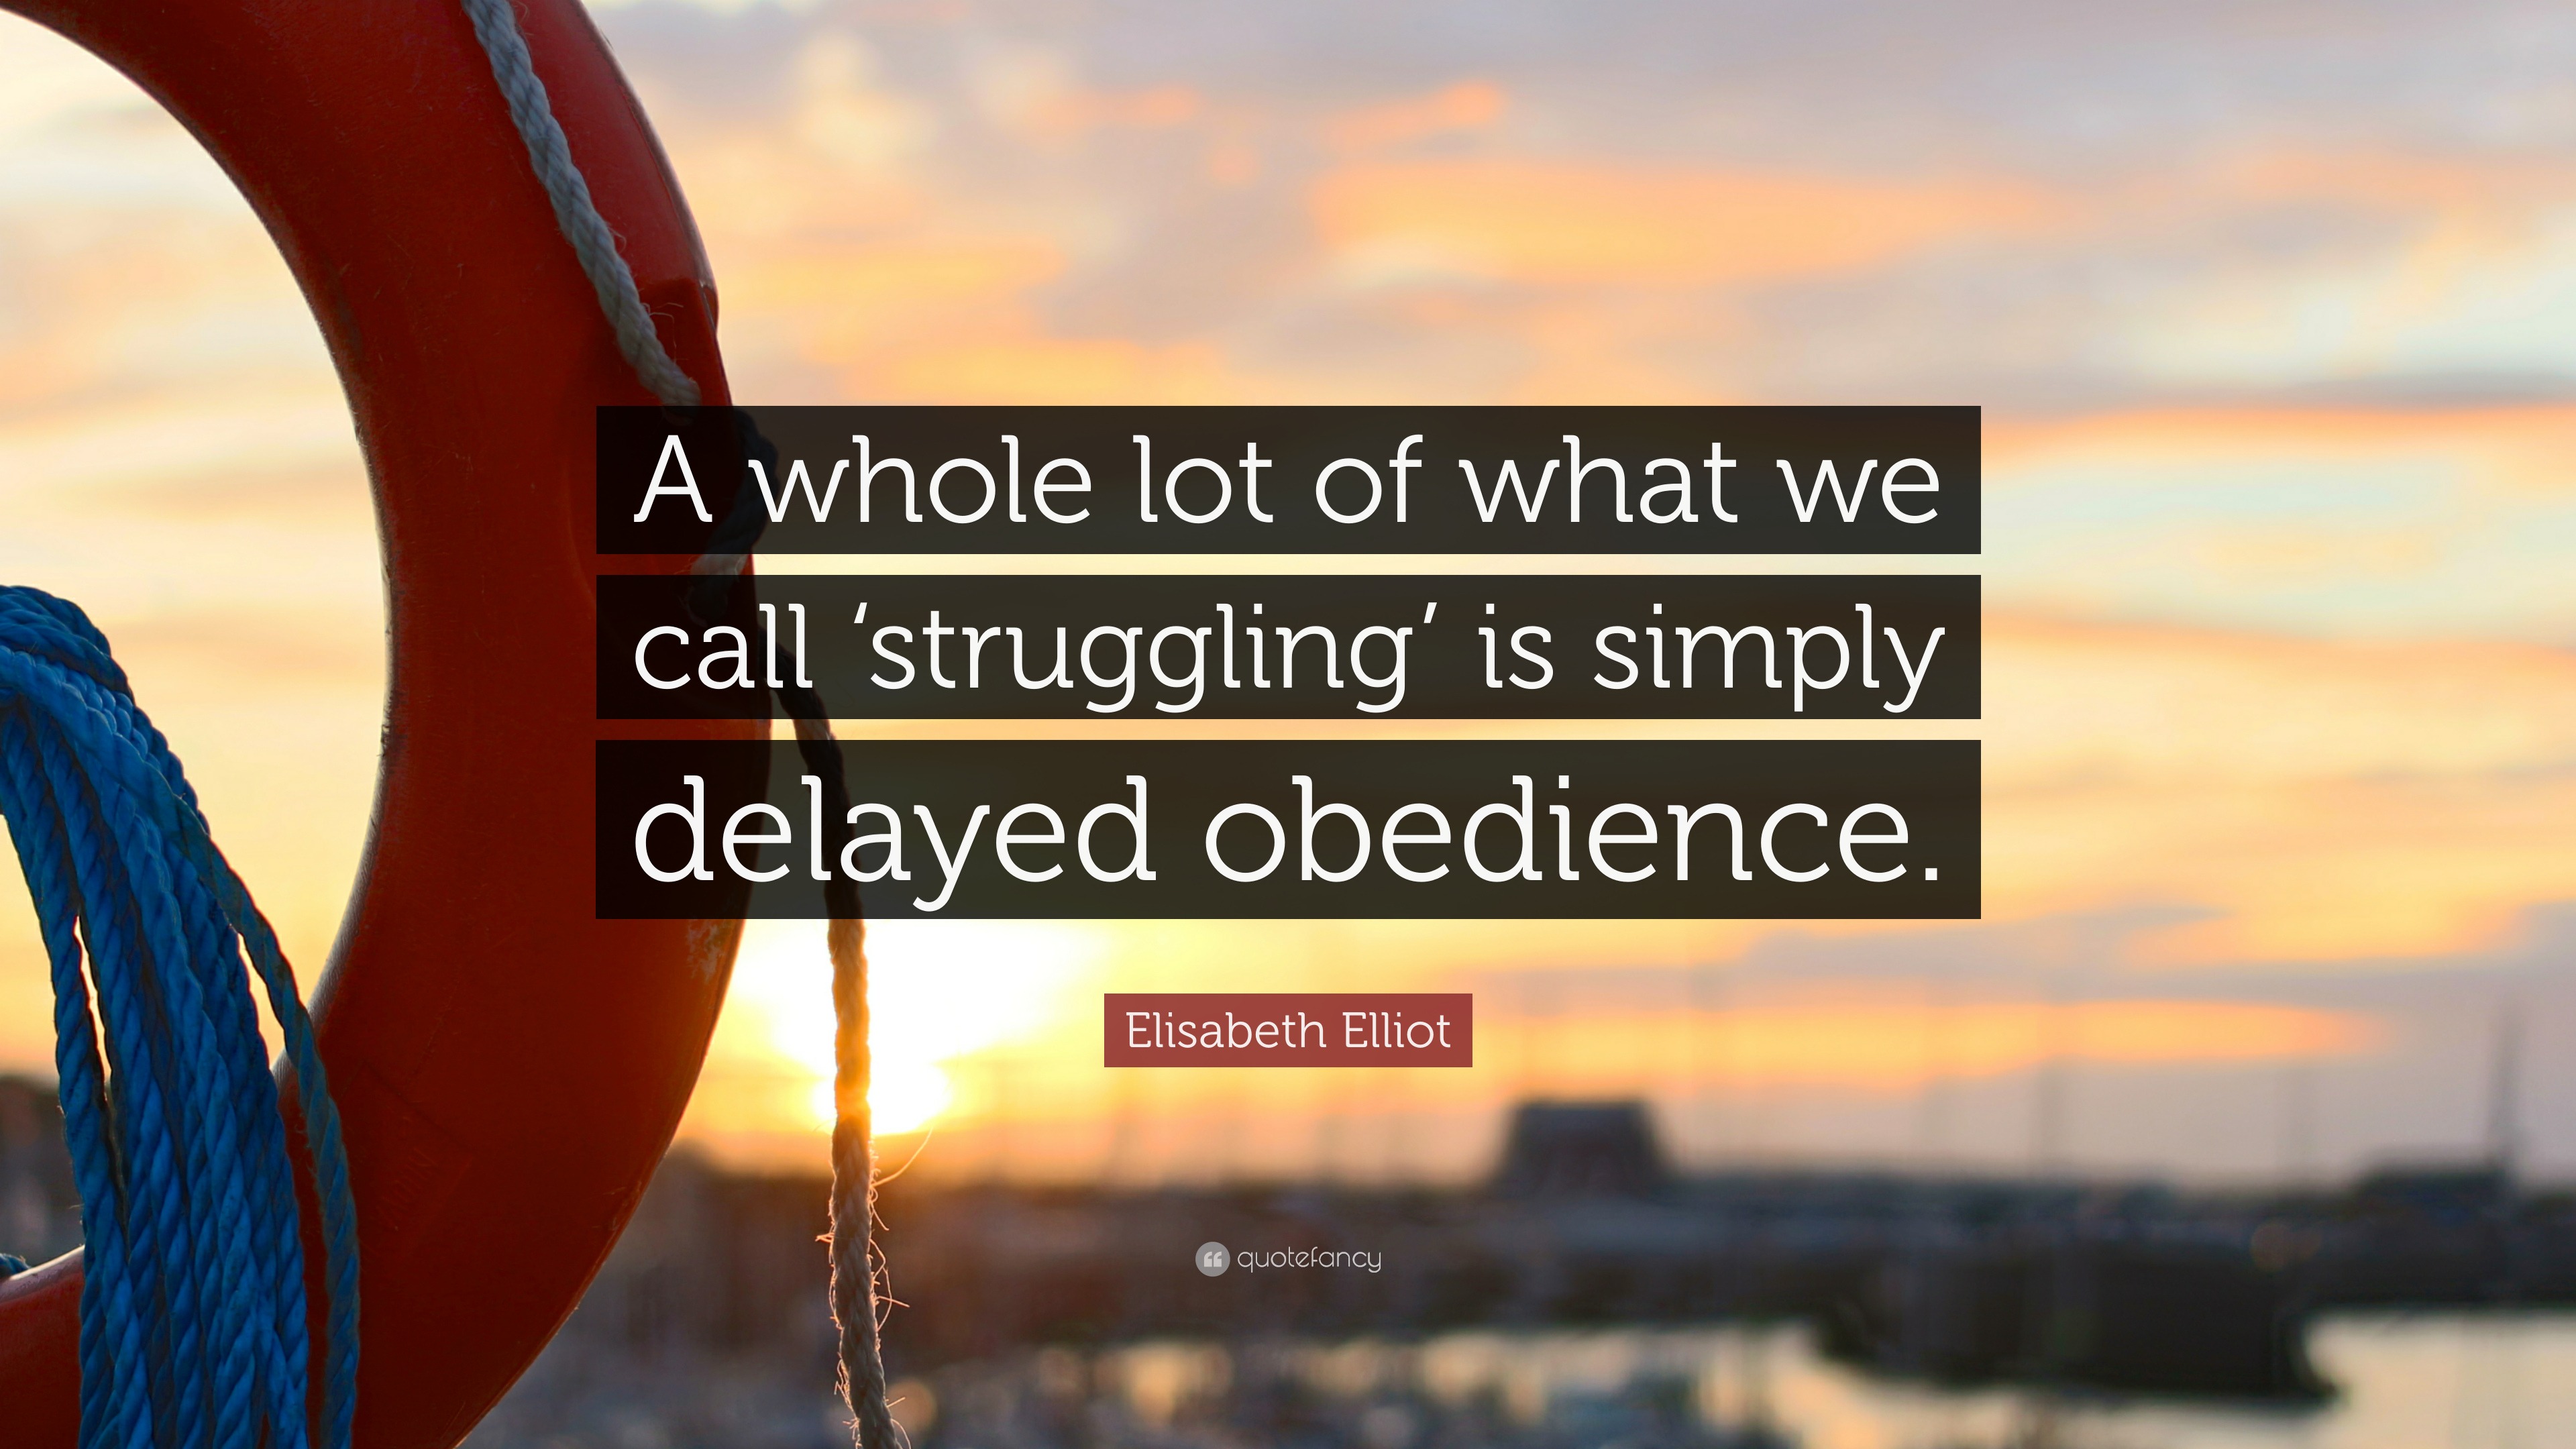 Elisabeth Elliot Quote: “A whole lot of what we call ‘struggling’ is ...